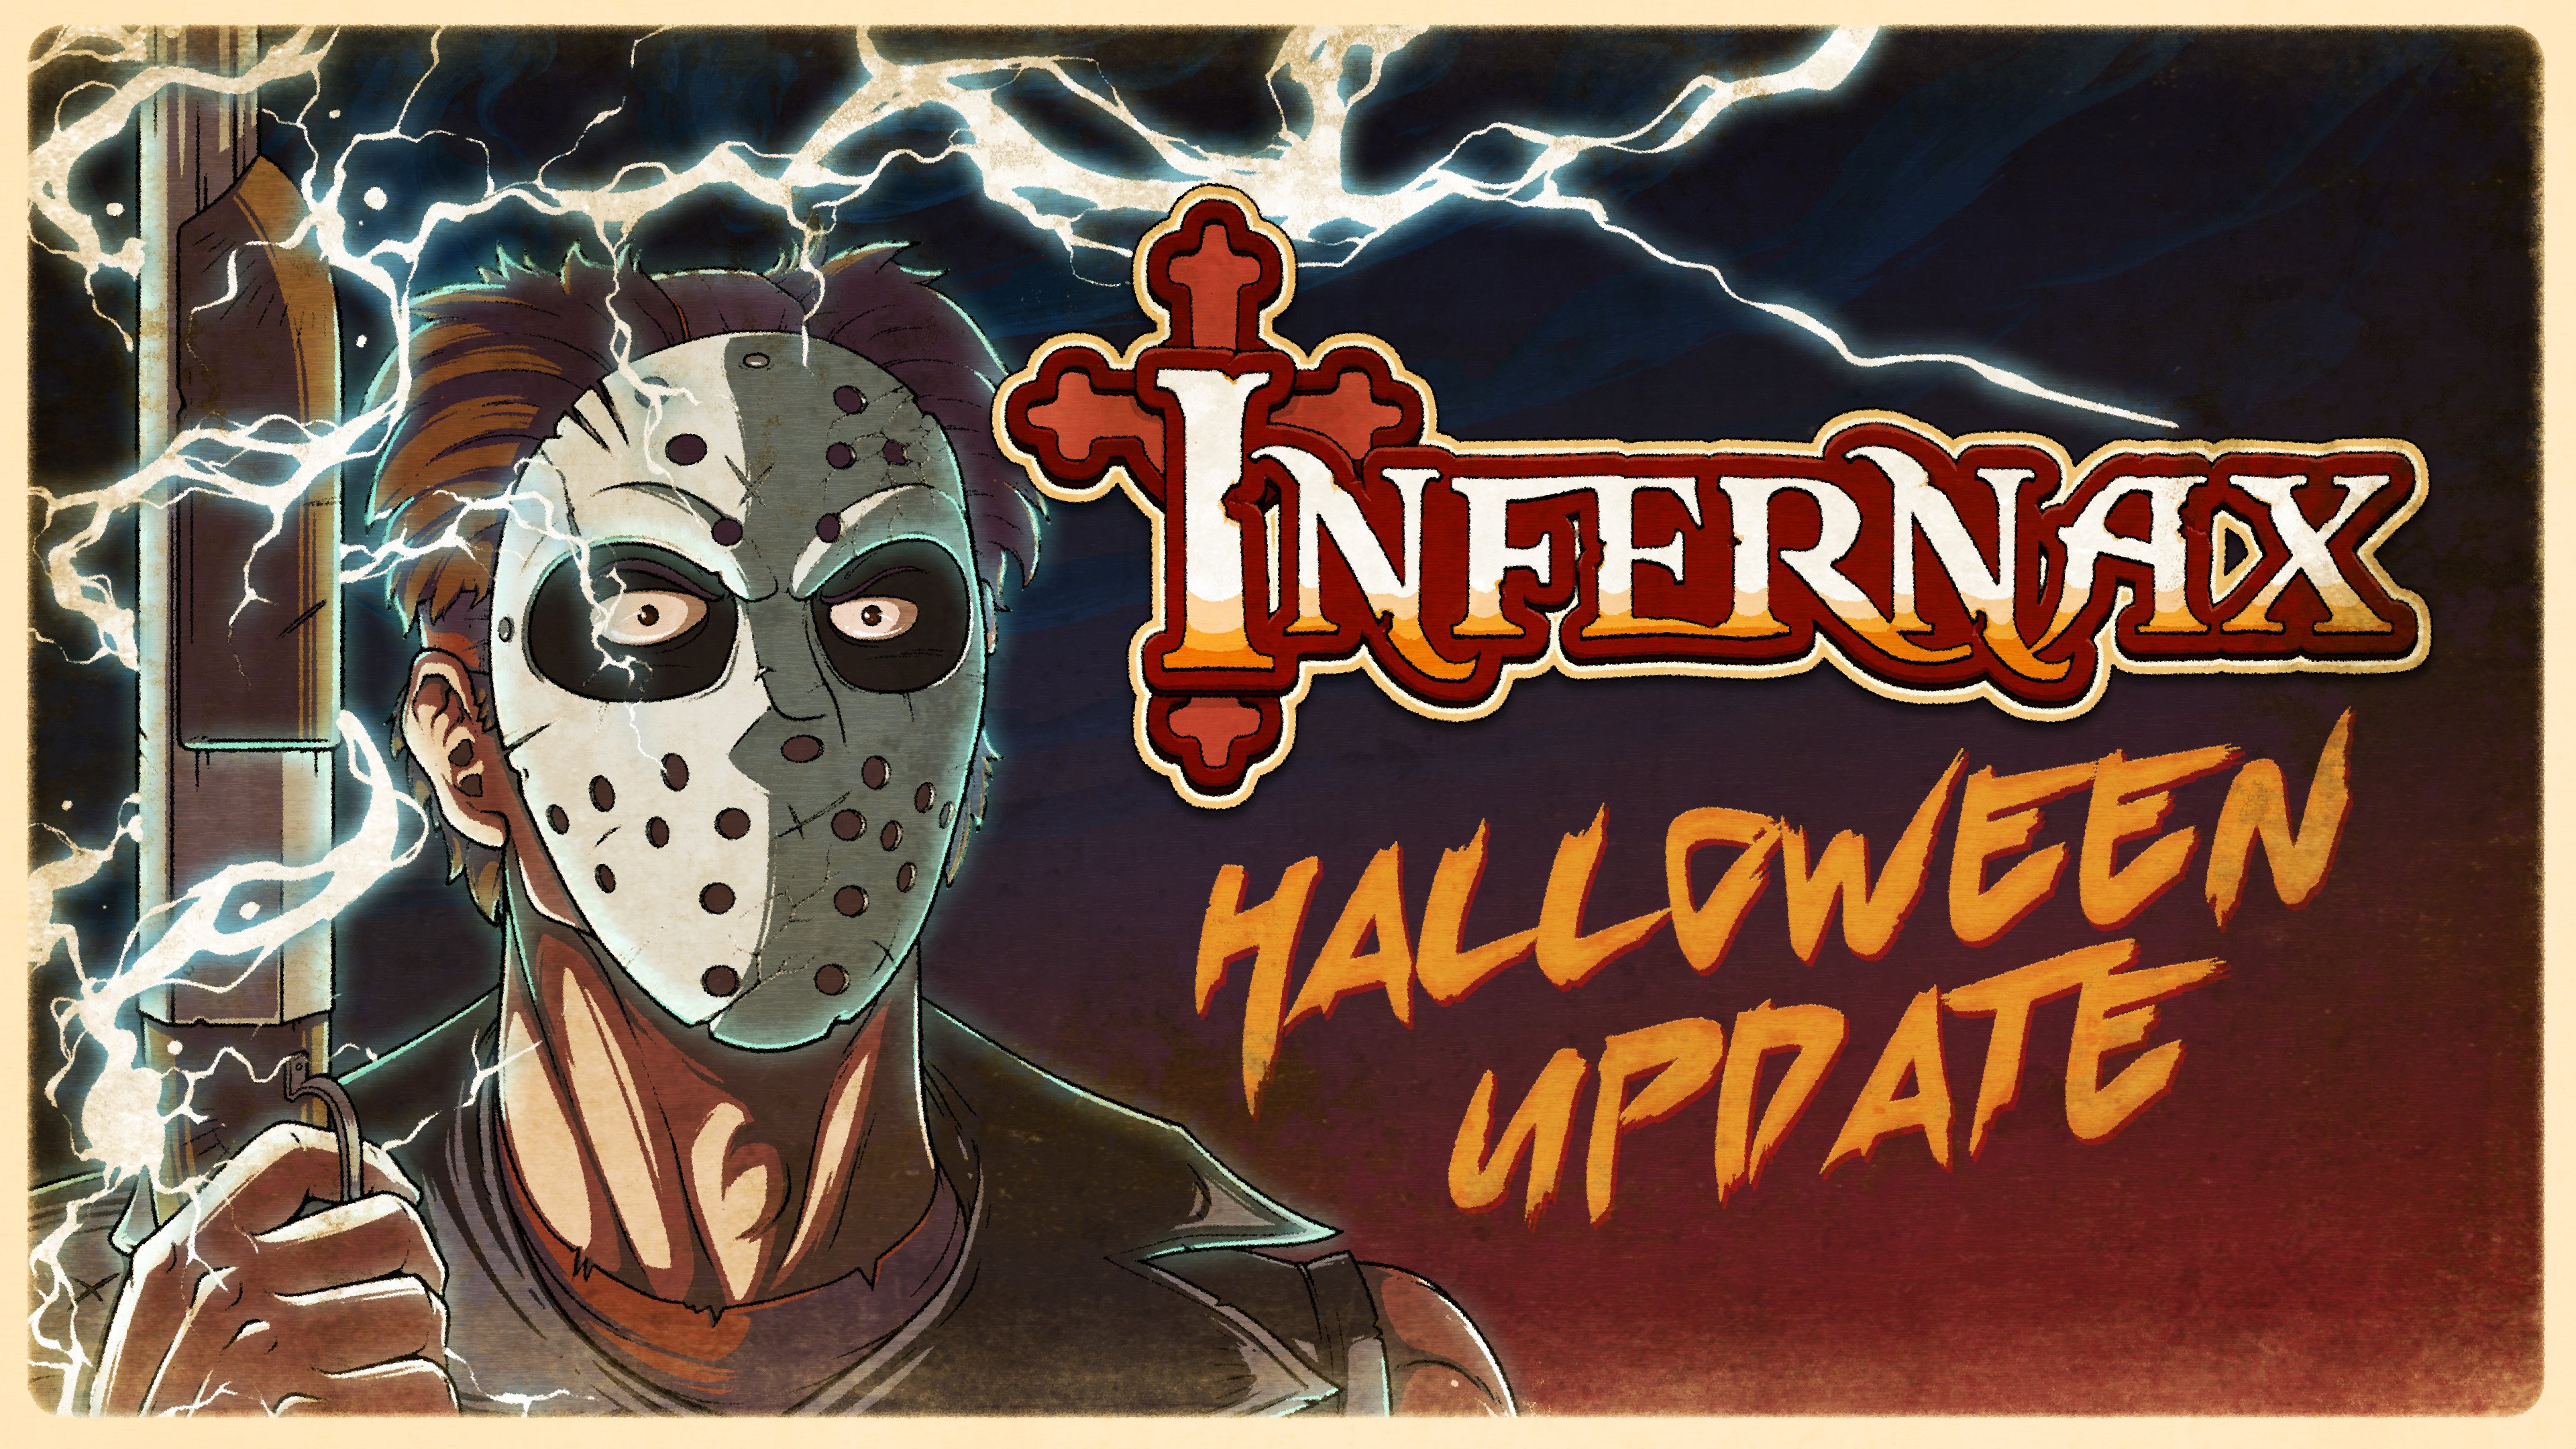 #
      Infernax – Halloween update adds new playable character ‘The Stranger’ on October 25